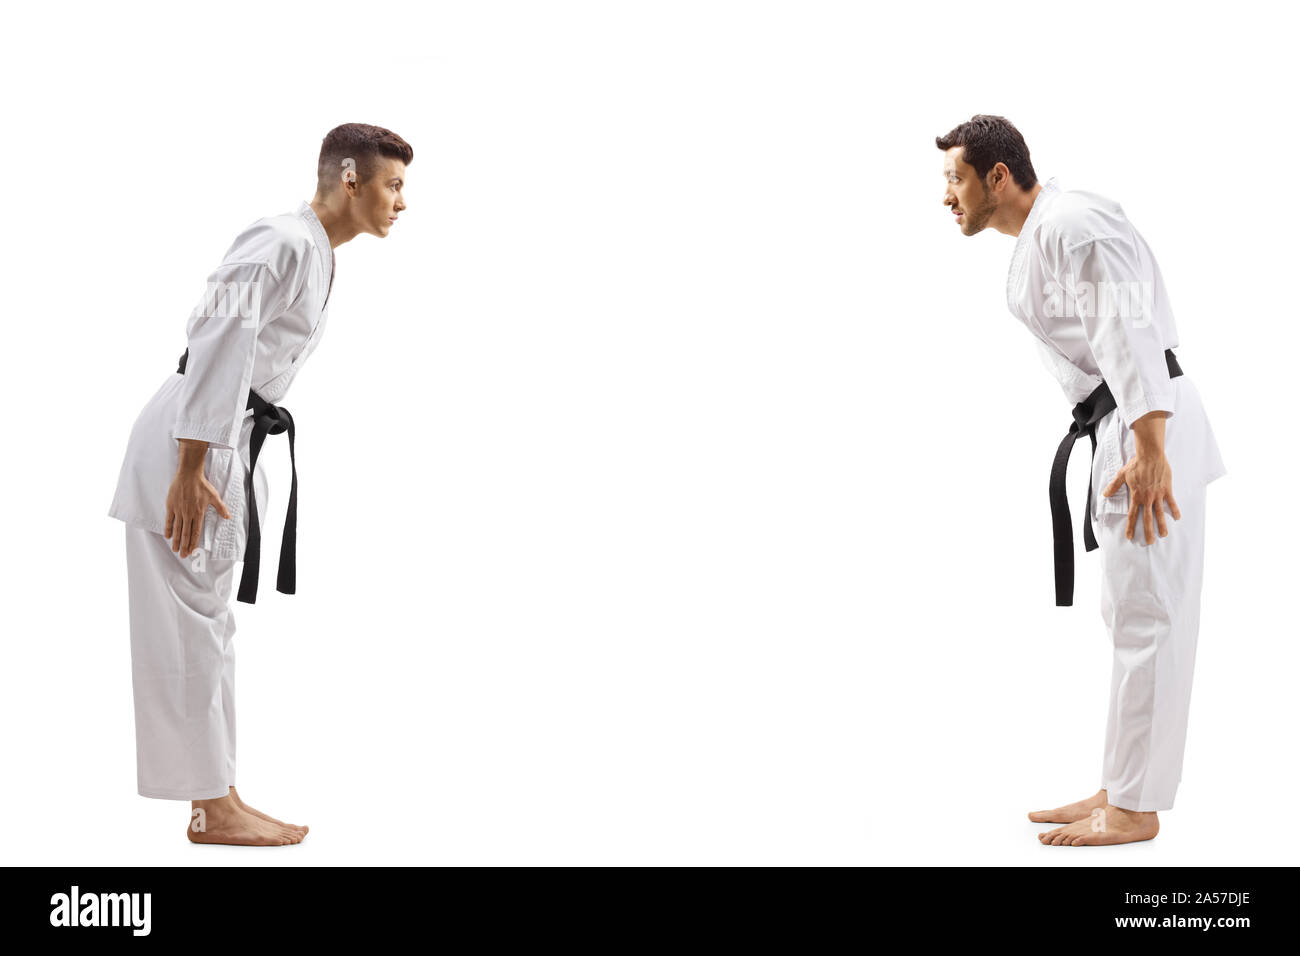 Full length profile shot of young men in karate kimonos bowing to each other isolated on white background Stock Photo